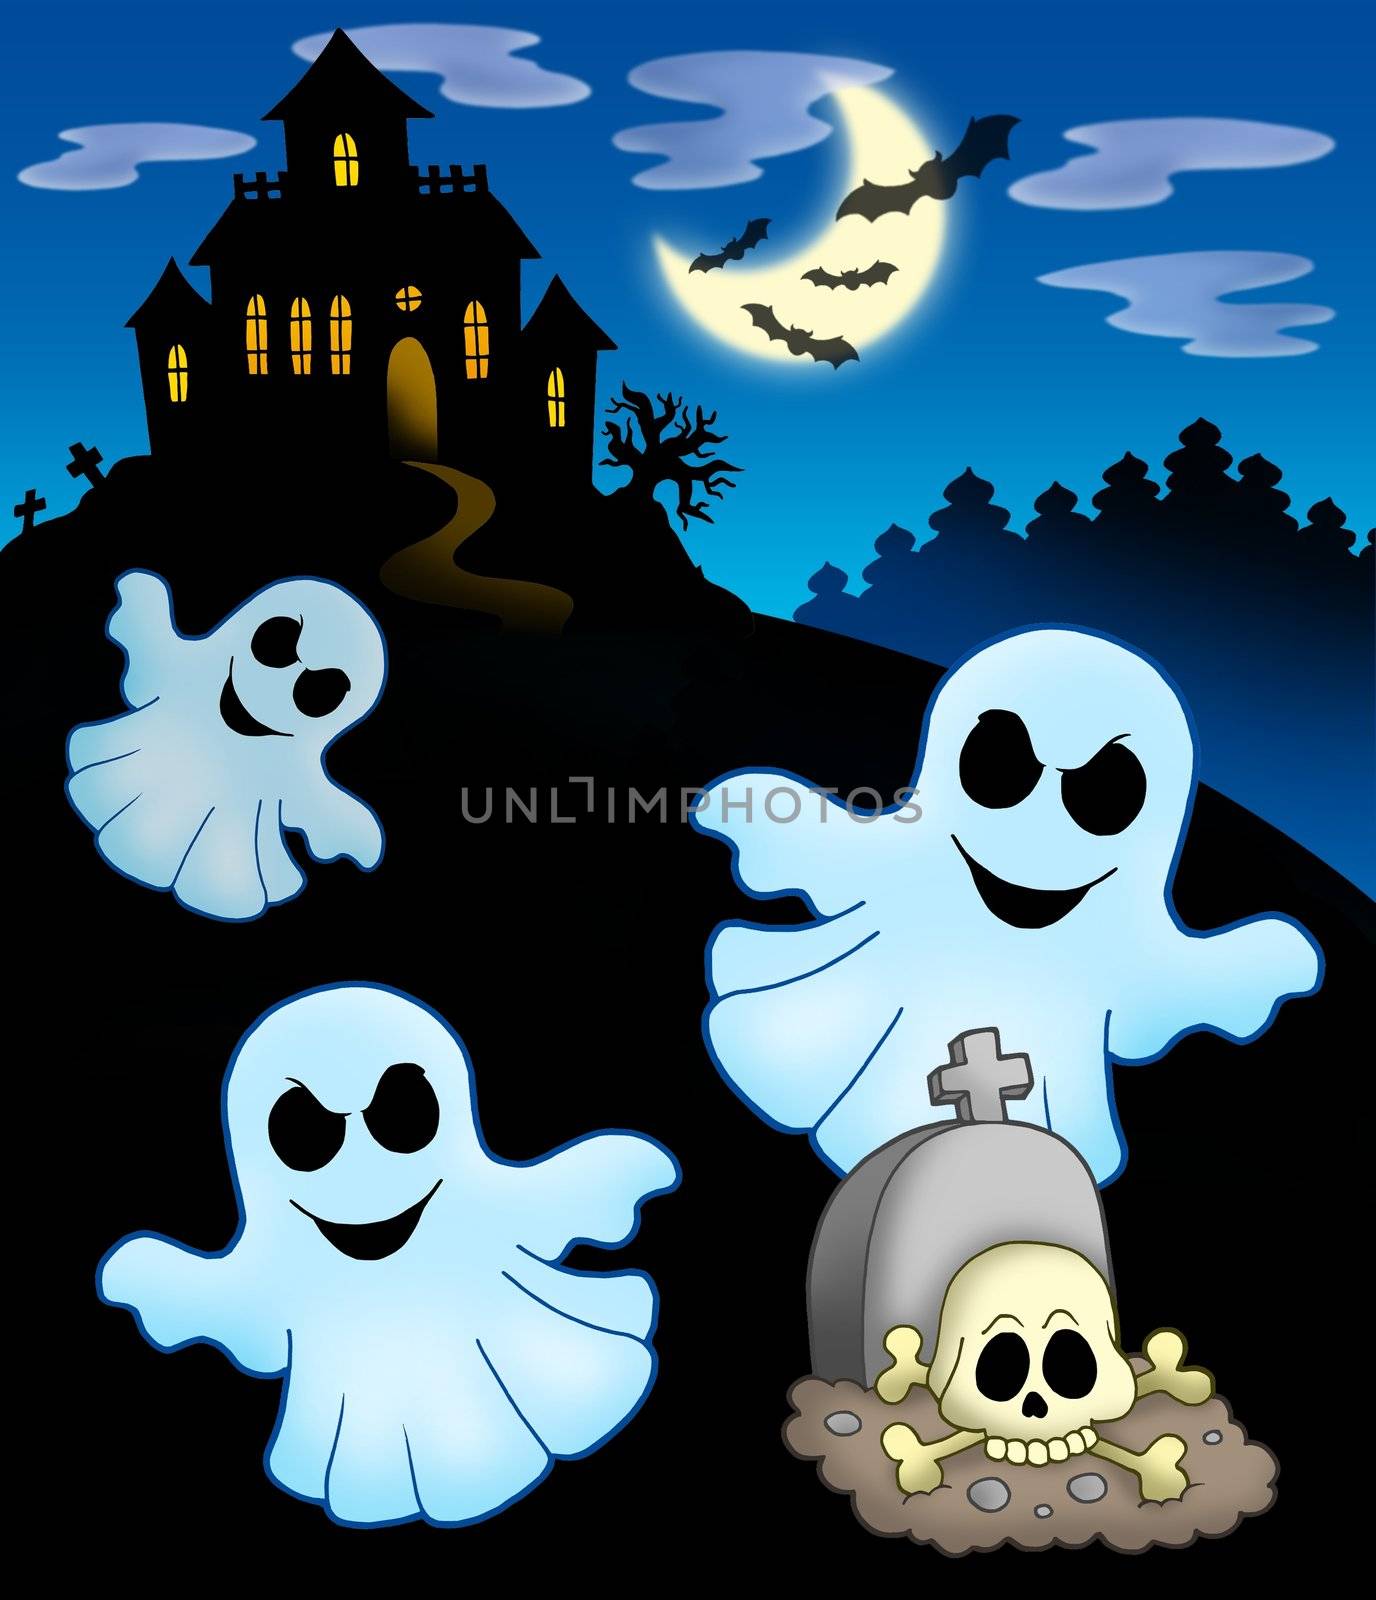 Ghosts with haunted house - color illustration.